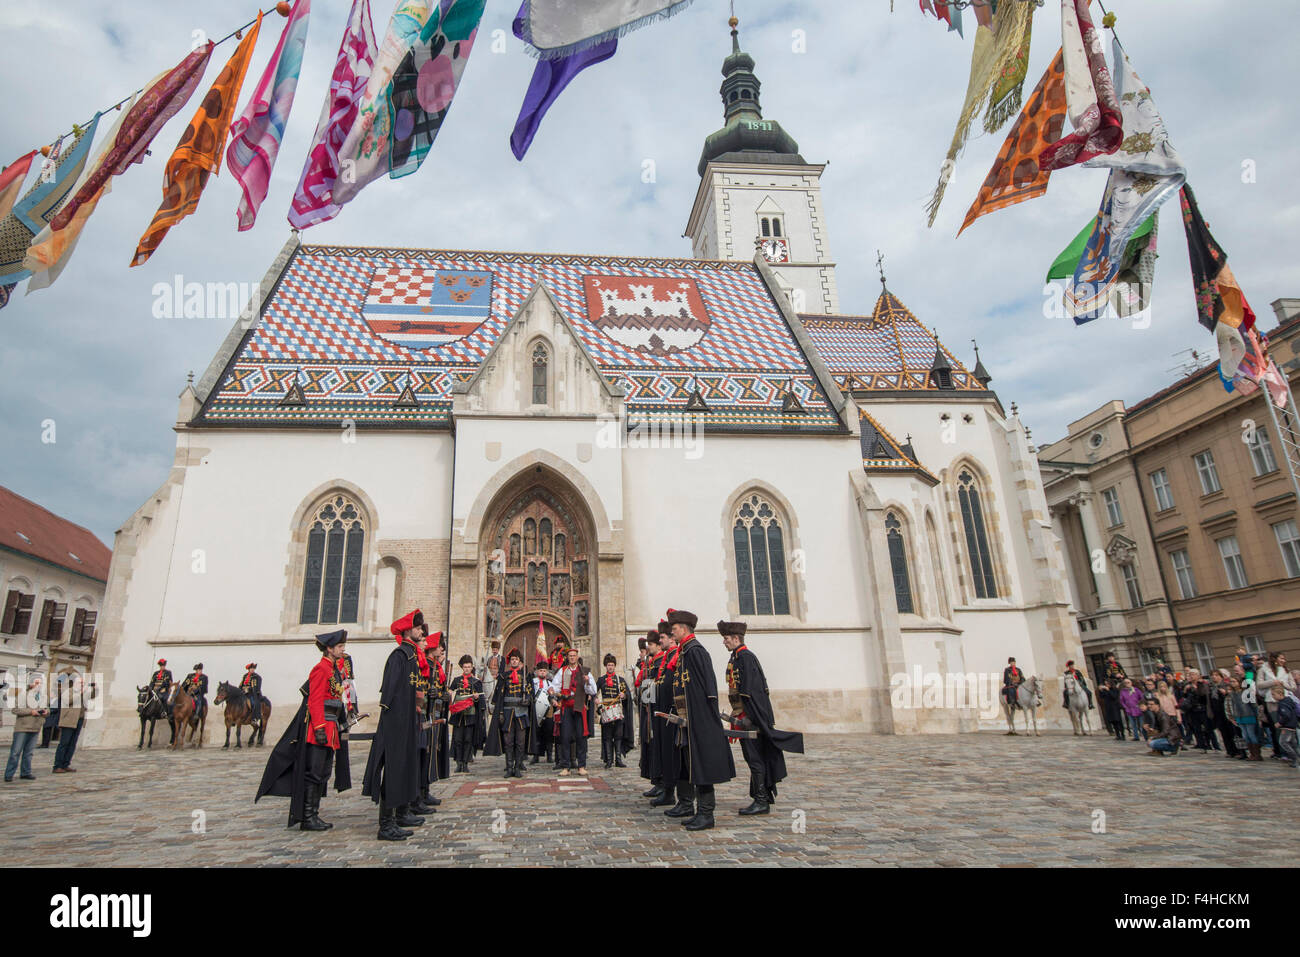 Zagreb, Croatia. 18th Oct, 2015. Soldiers of the Guard of Honor of the Cravat Regiment take part in the Cravat Day celebration in Zagreb, capital of Croatia, Oct. 18, 2015. In 2008 Croatian Parliament showed special honor to the cravat as a national heritage and declared 18th October as the Cravat Day. A Cravat, symbol of culture and style, originated from a red neck scarves worn by Croatian soldiers serving in France in the 17th century. © Miso Lisanin/Xinhua/Alamy Live News Stock Photo